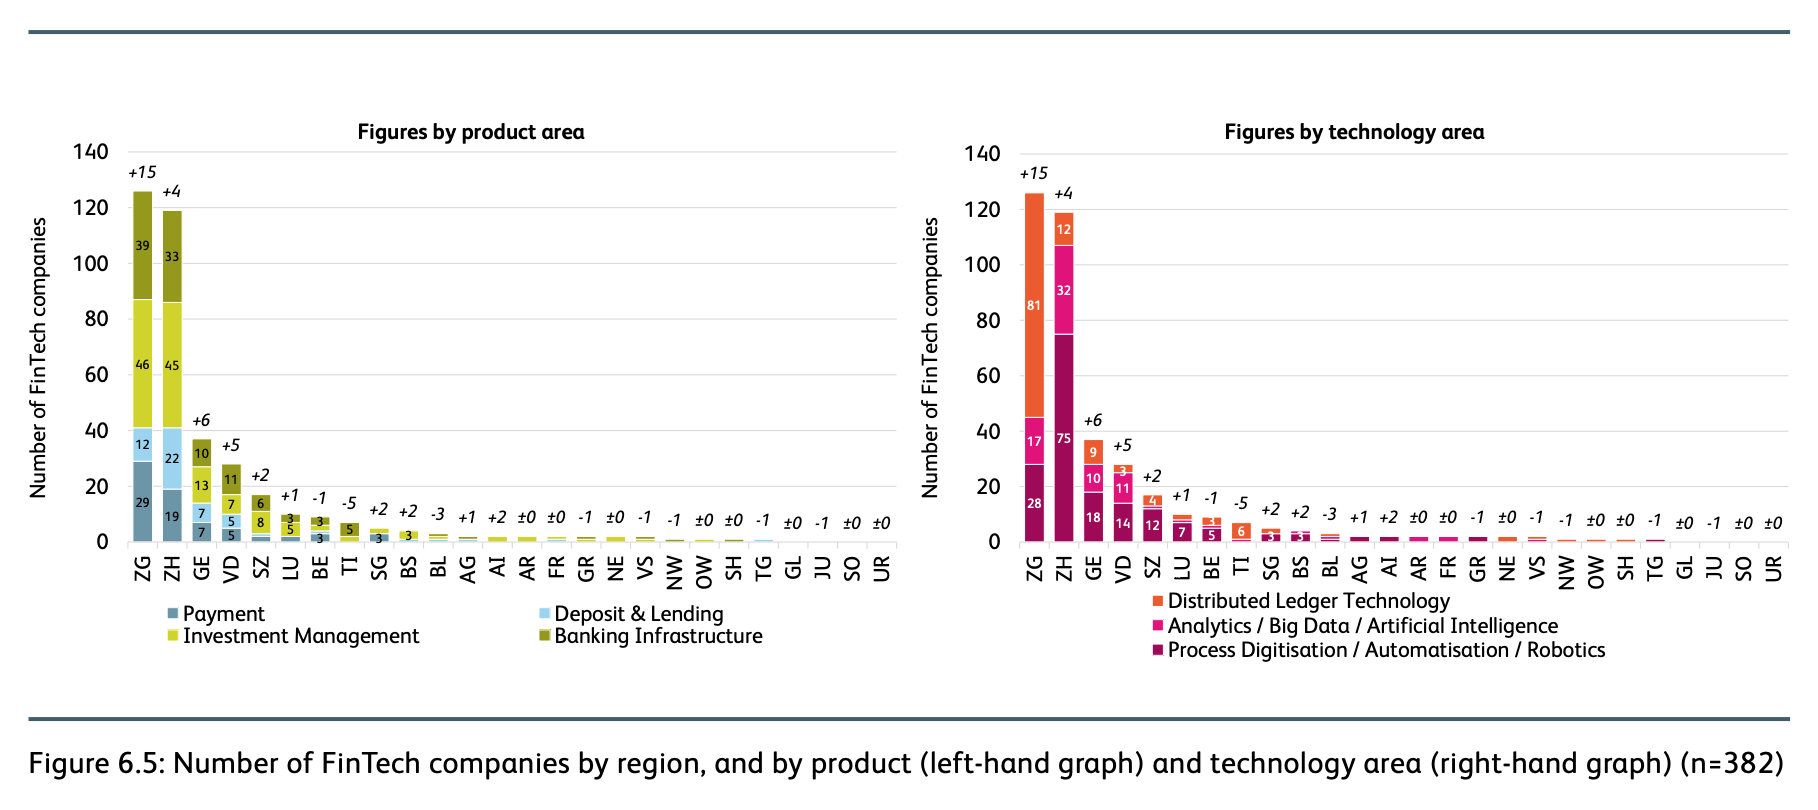 Number of FinTech companies by region, and by product (left-hand graph) and technology area (right-hand graph) (n=382), IFZ Fintech Study 2020